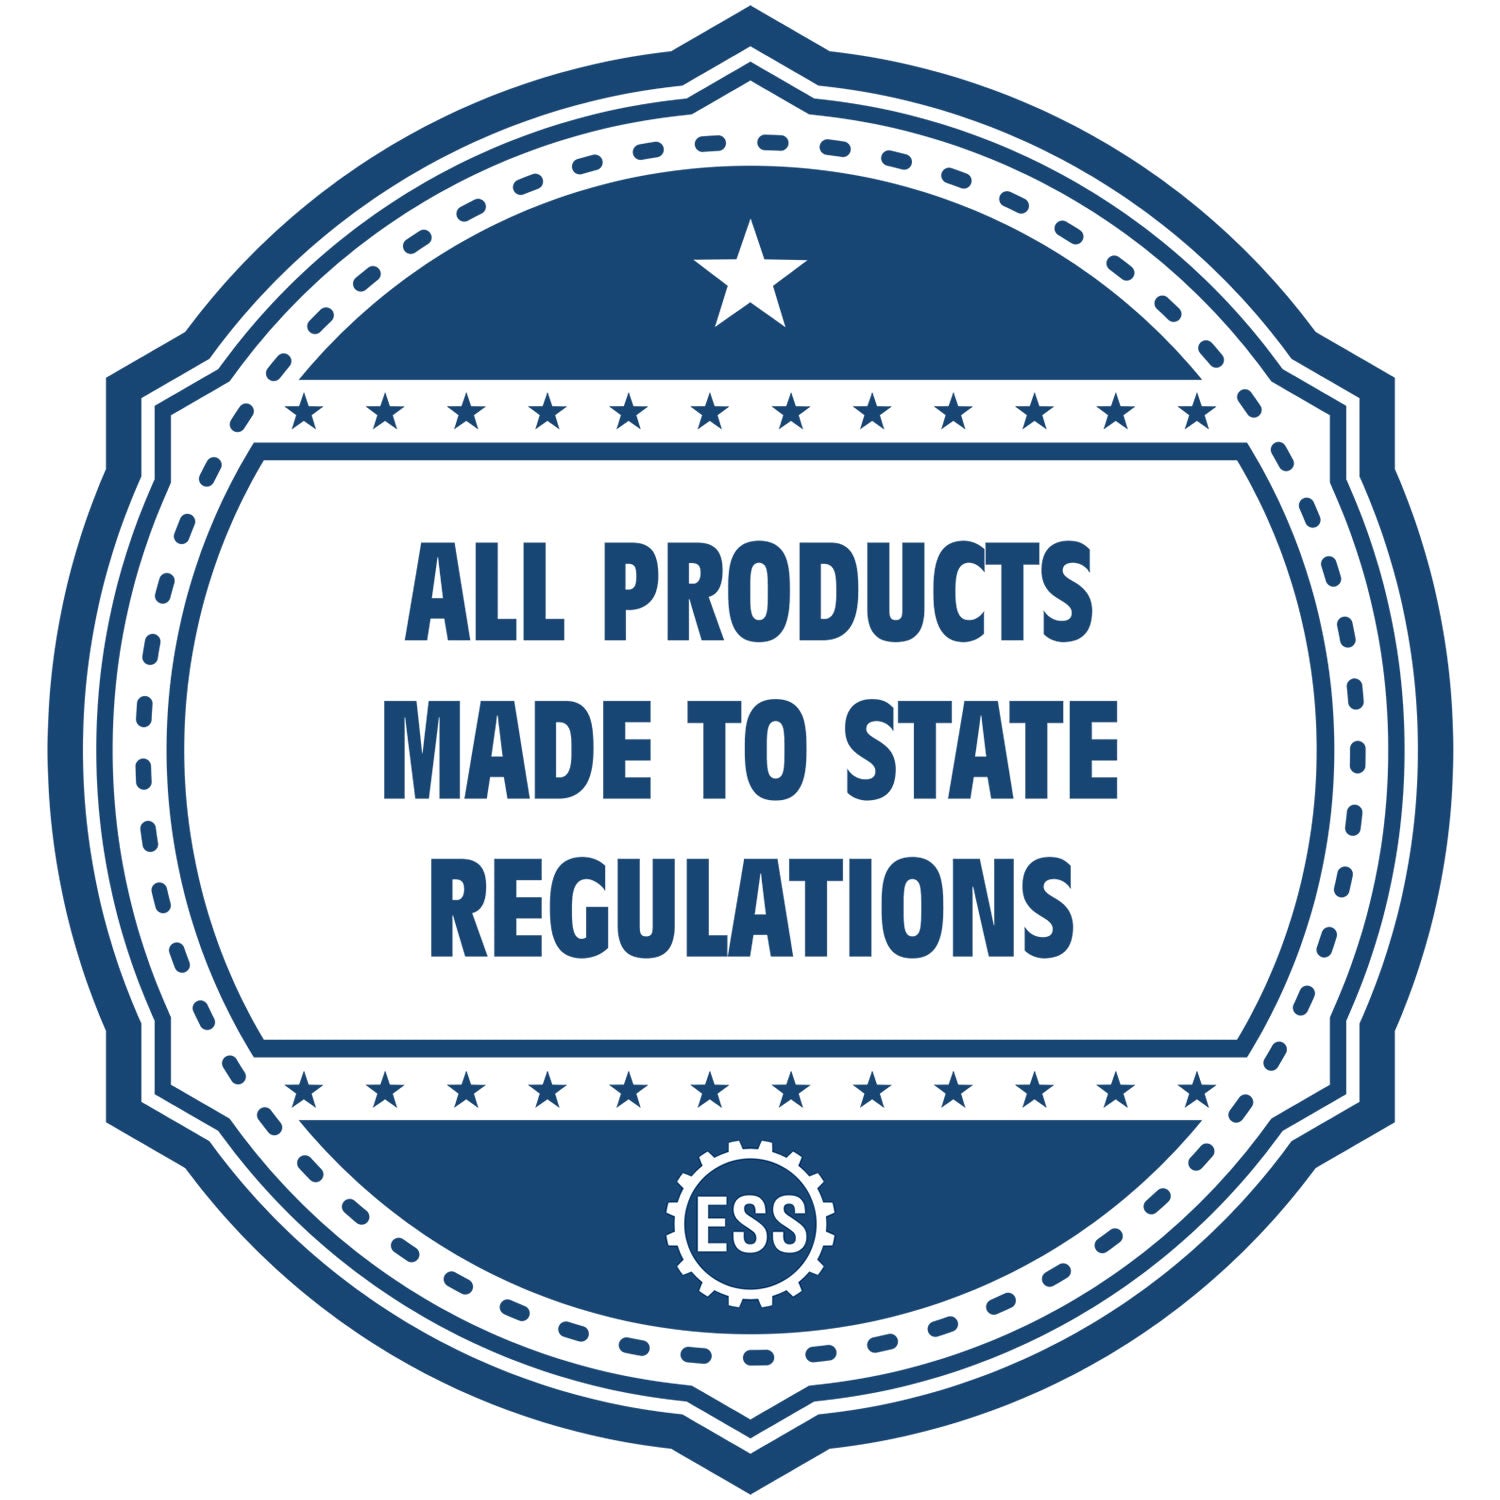 An icon or badge element for the Puerto Rico Engineer Desk Seal showing that this product is made in compliance with state regulations.